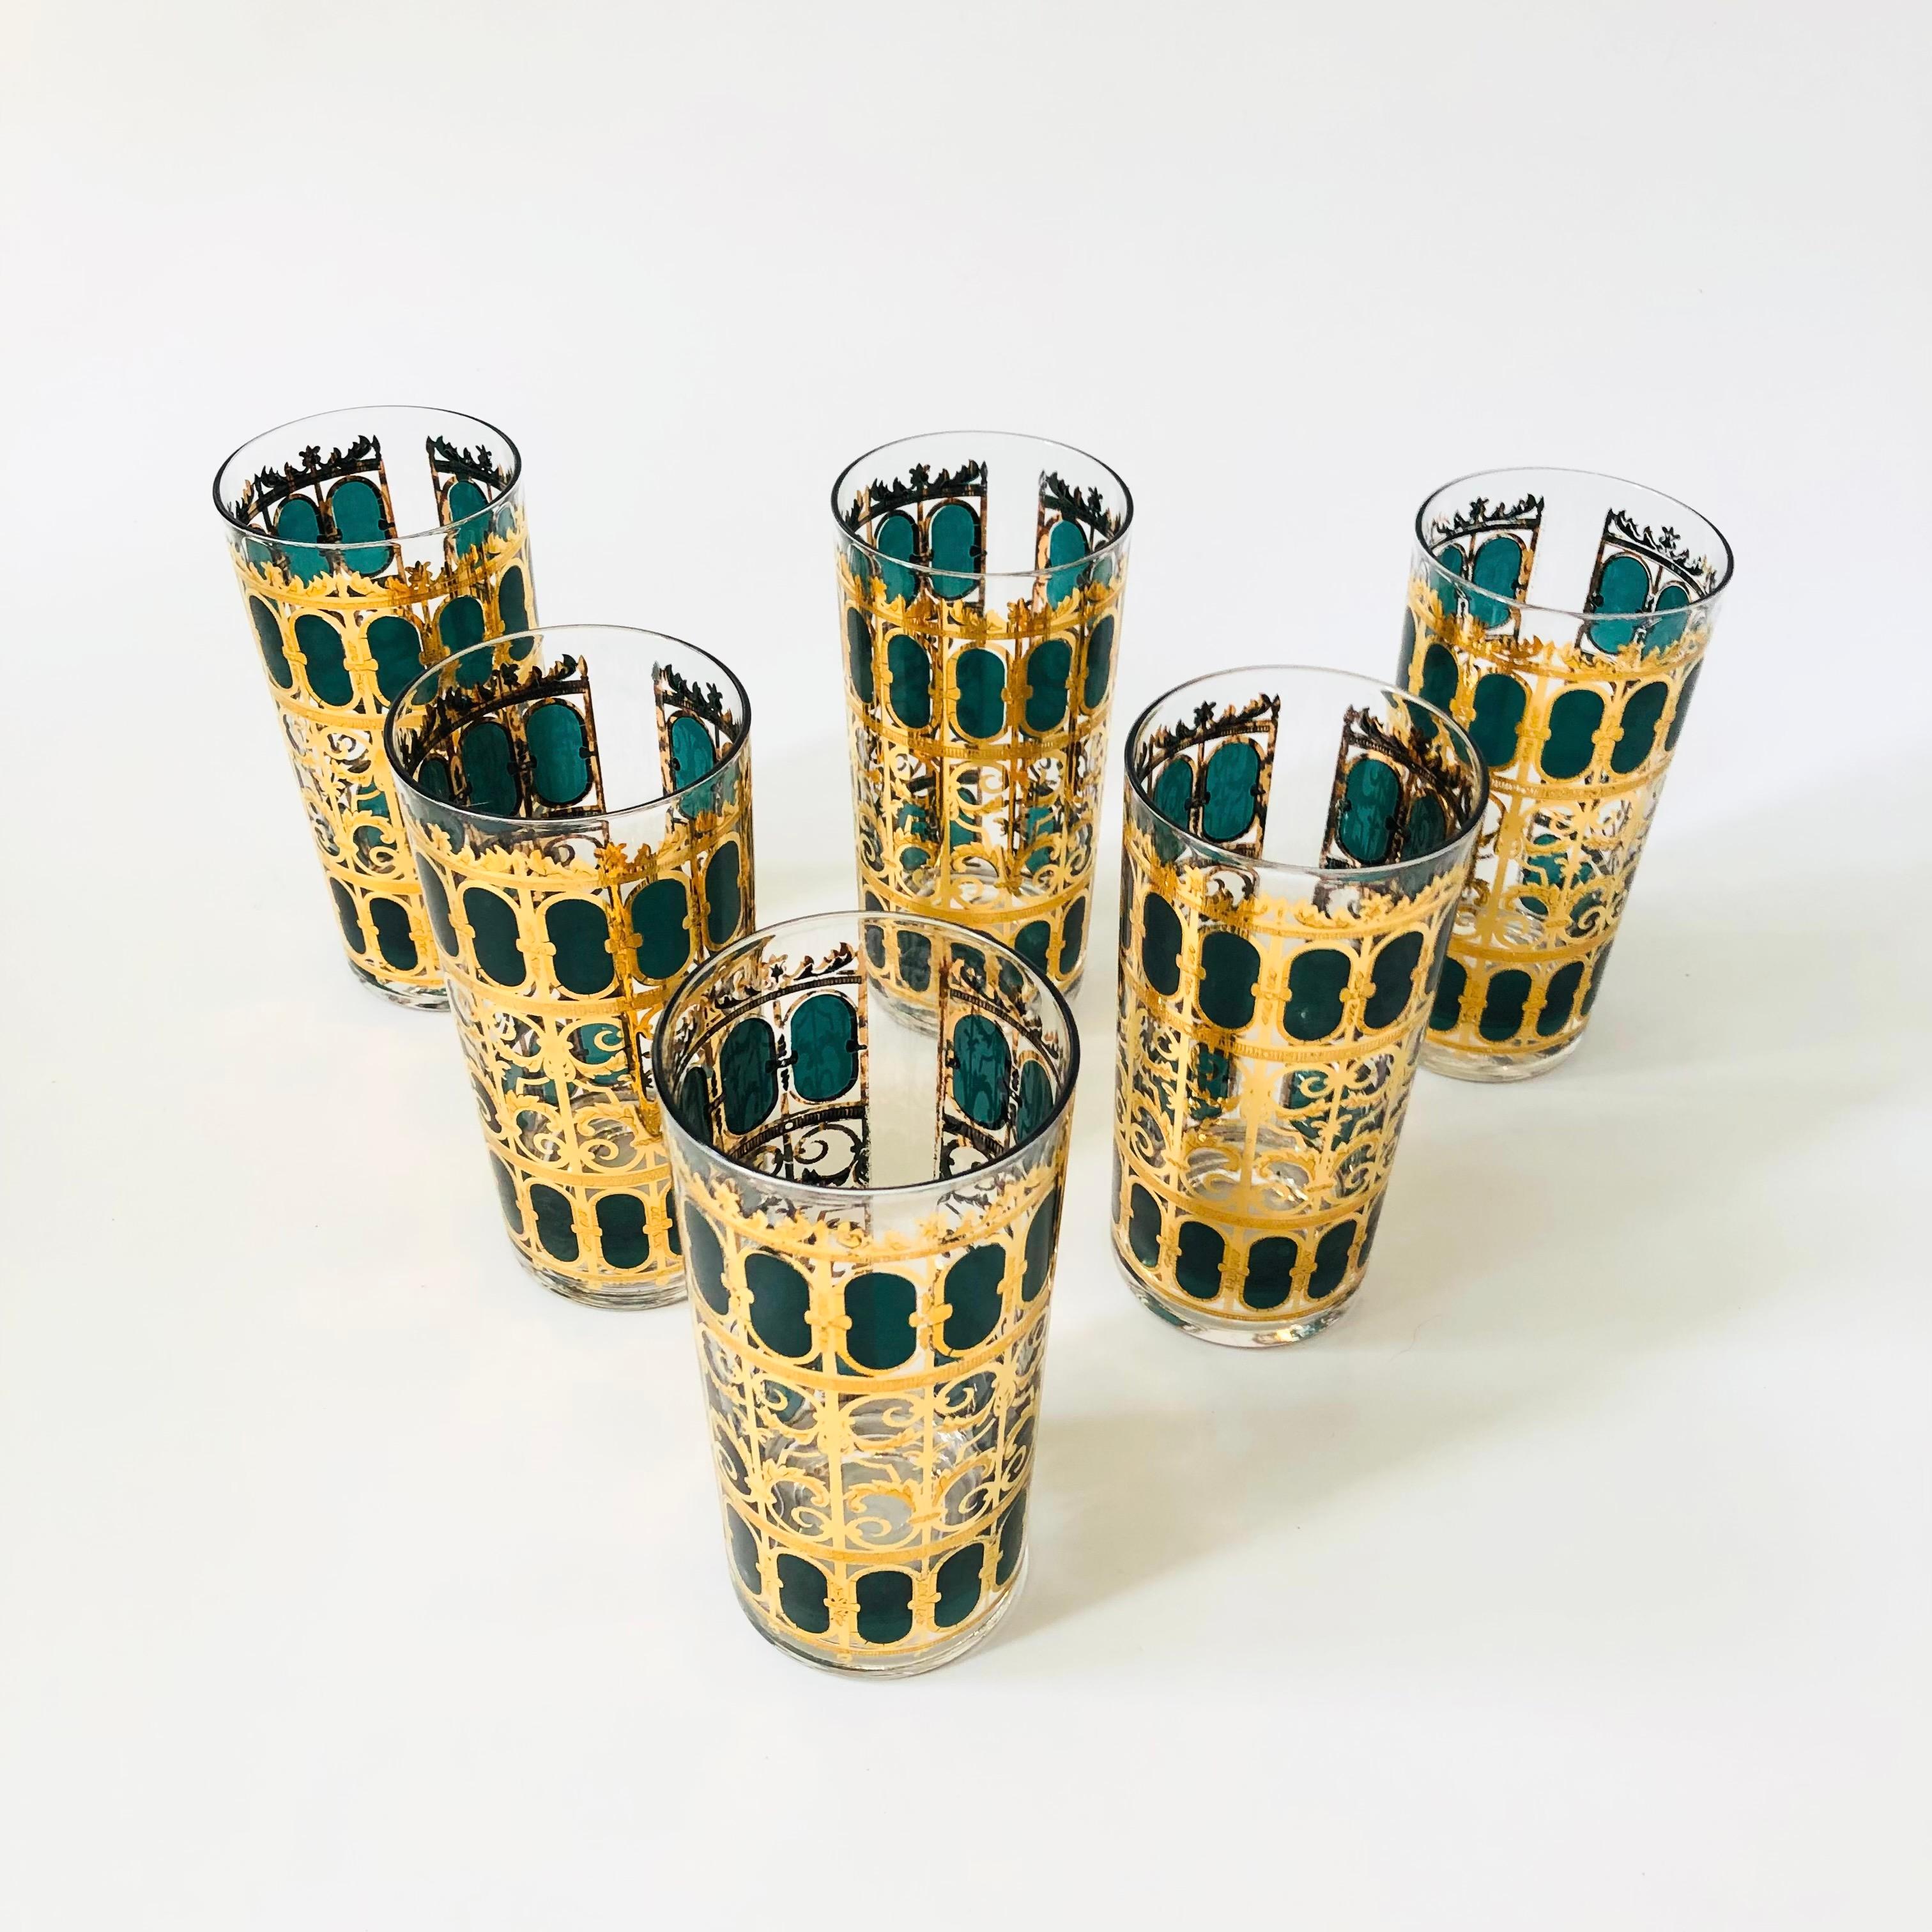 A set of 6 mid century highball tumblers by Culver. Each piece is wrapped in a beautiful 22 kt gold in the 